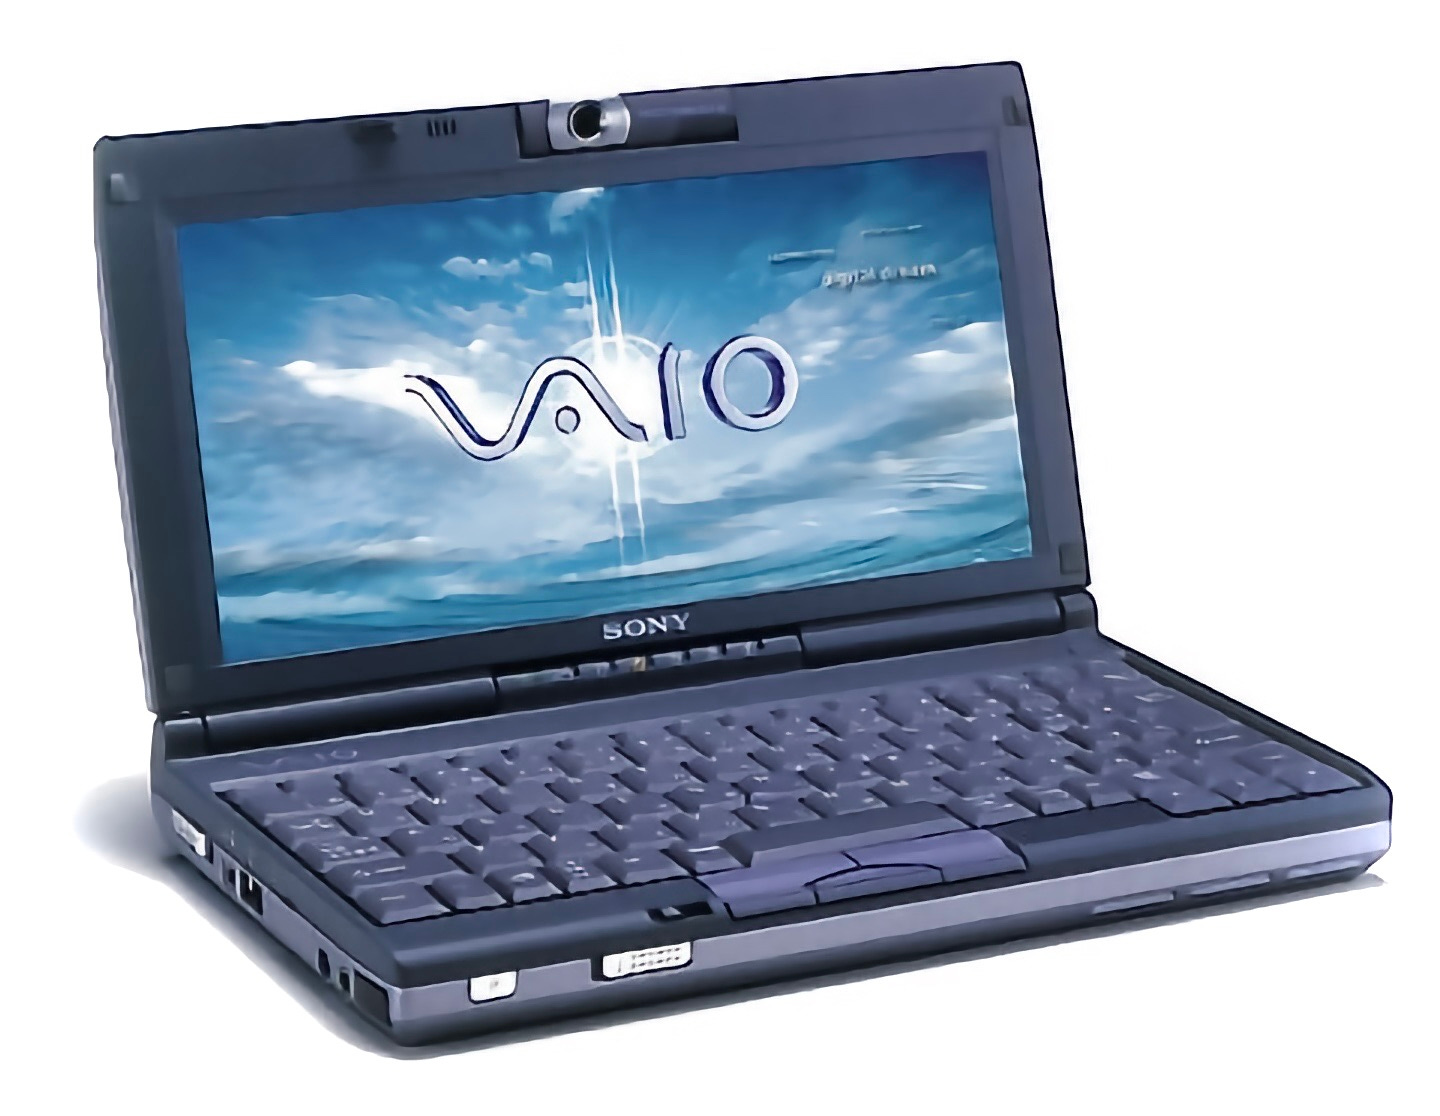 The Sony VAIO PCG-C1 Picturebook, with built-in camera